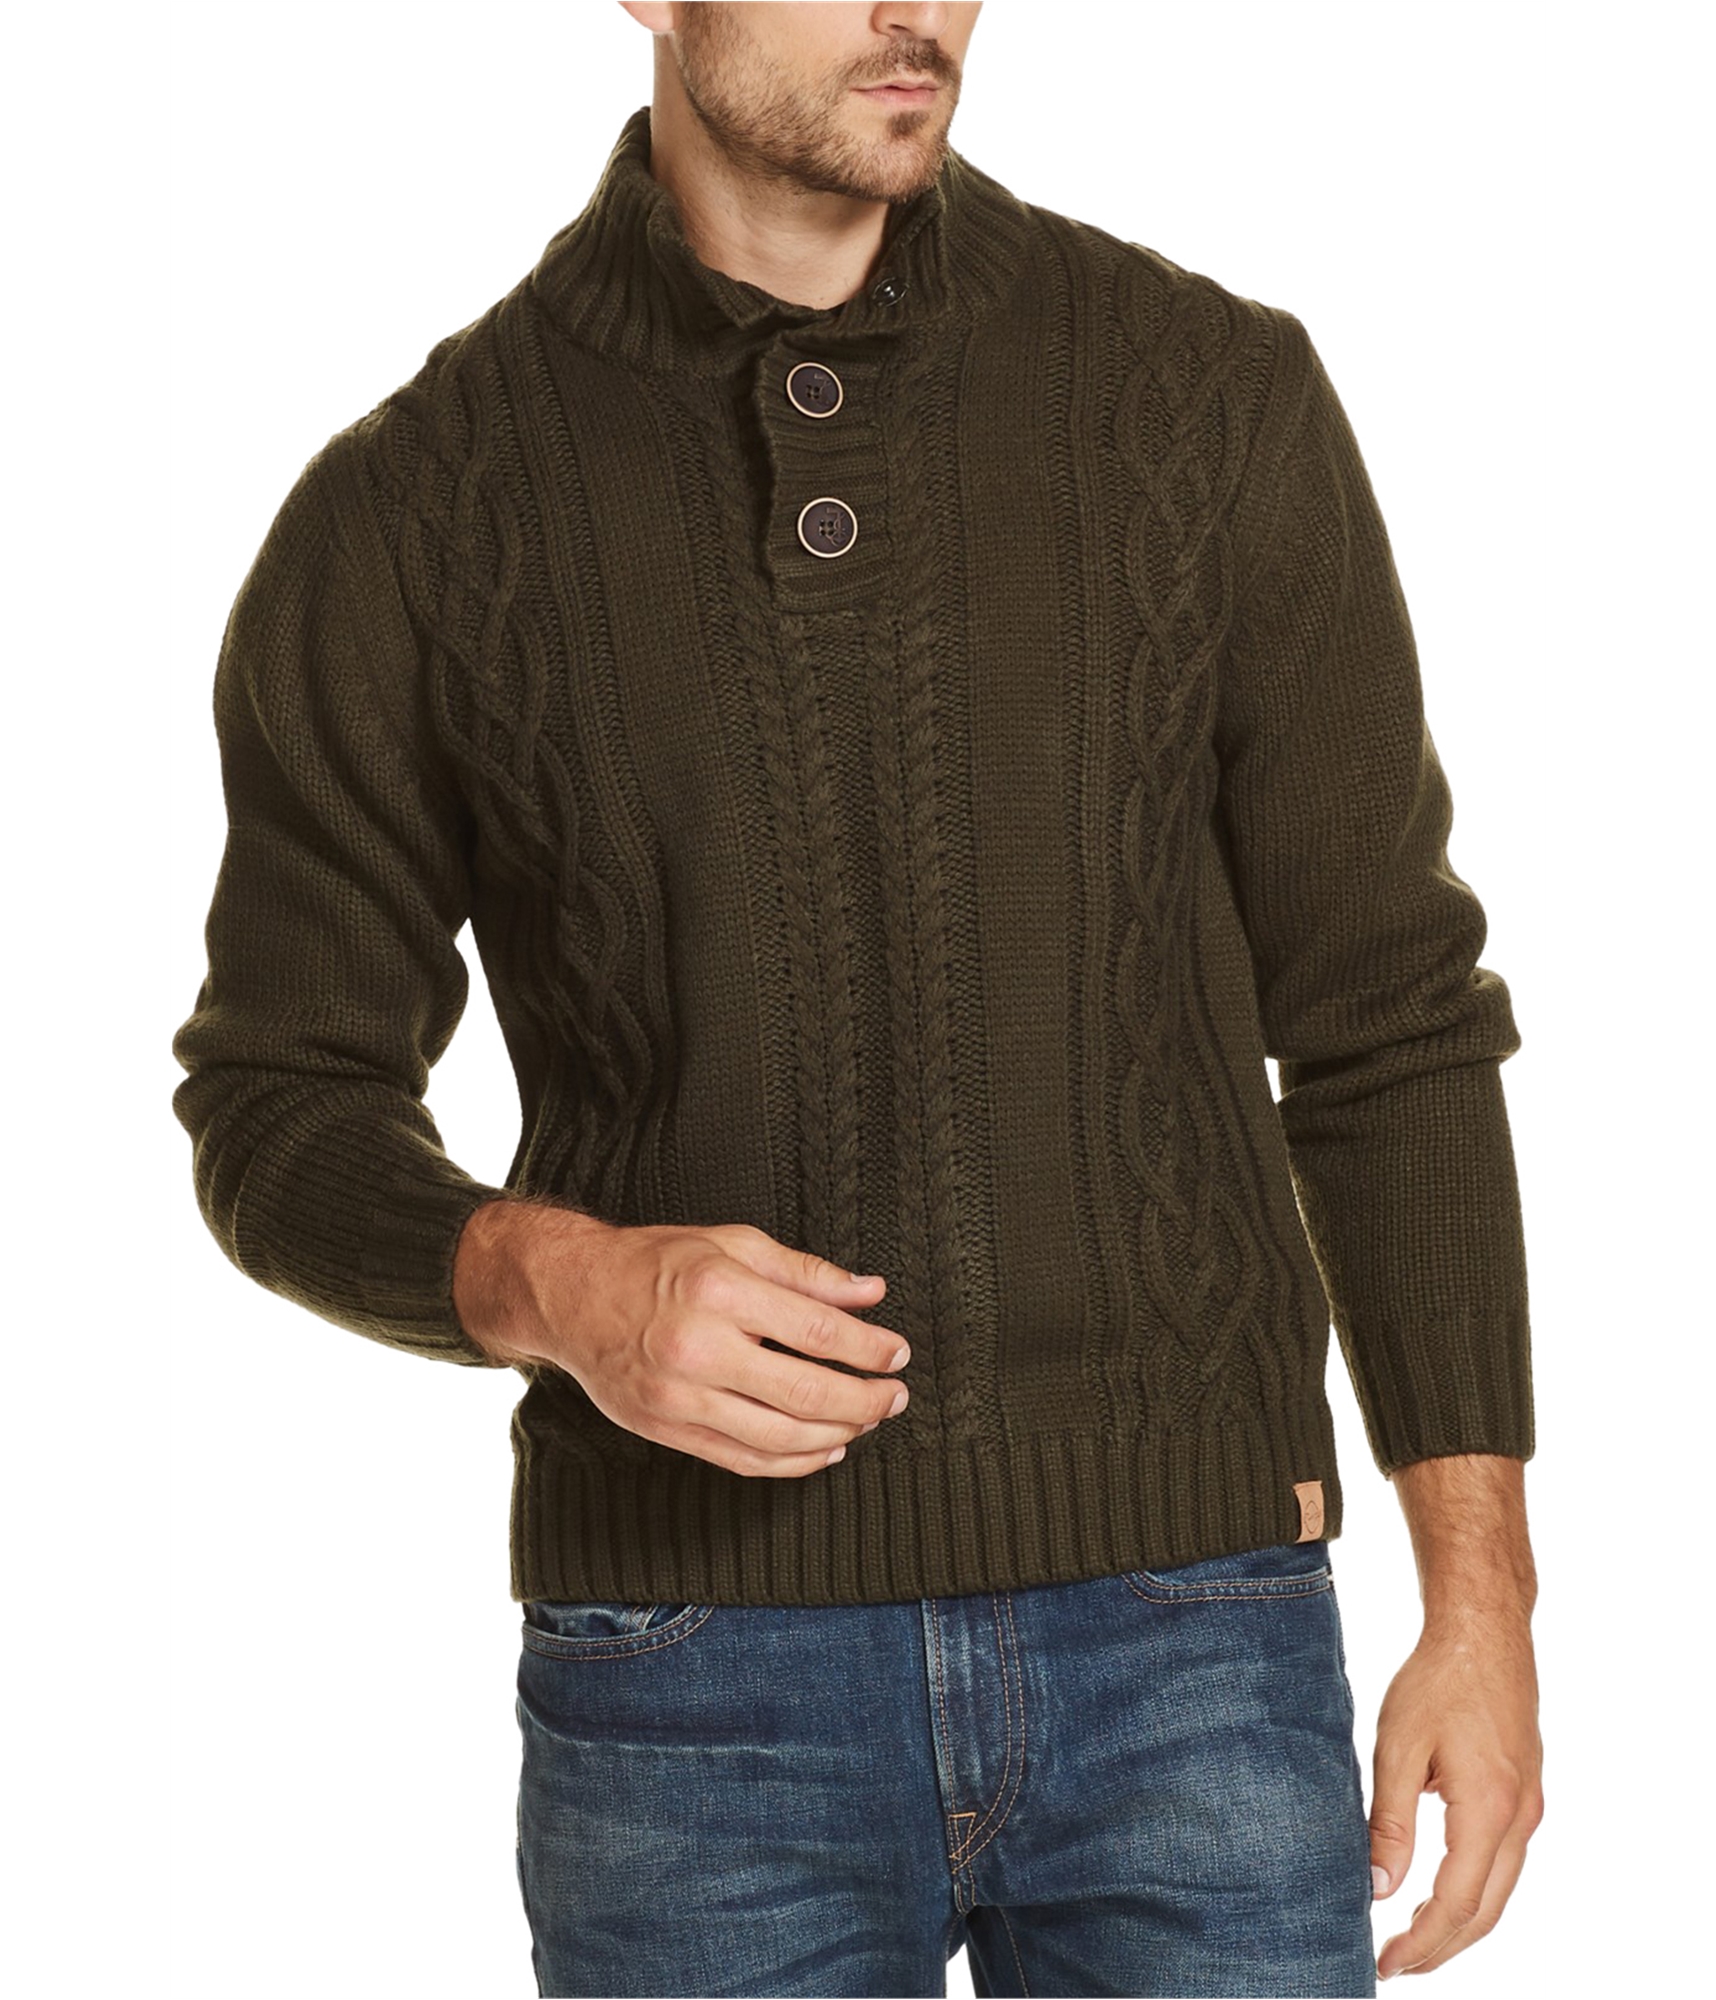 Weatherproof Mens Military Button Pullover Sweater | eBay